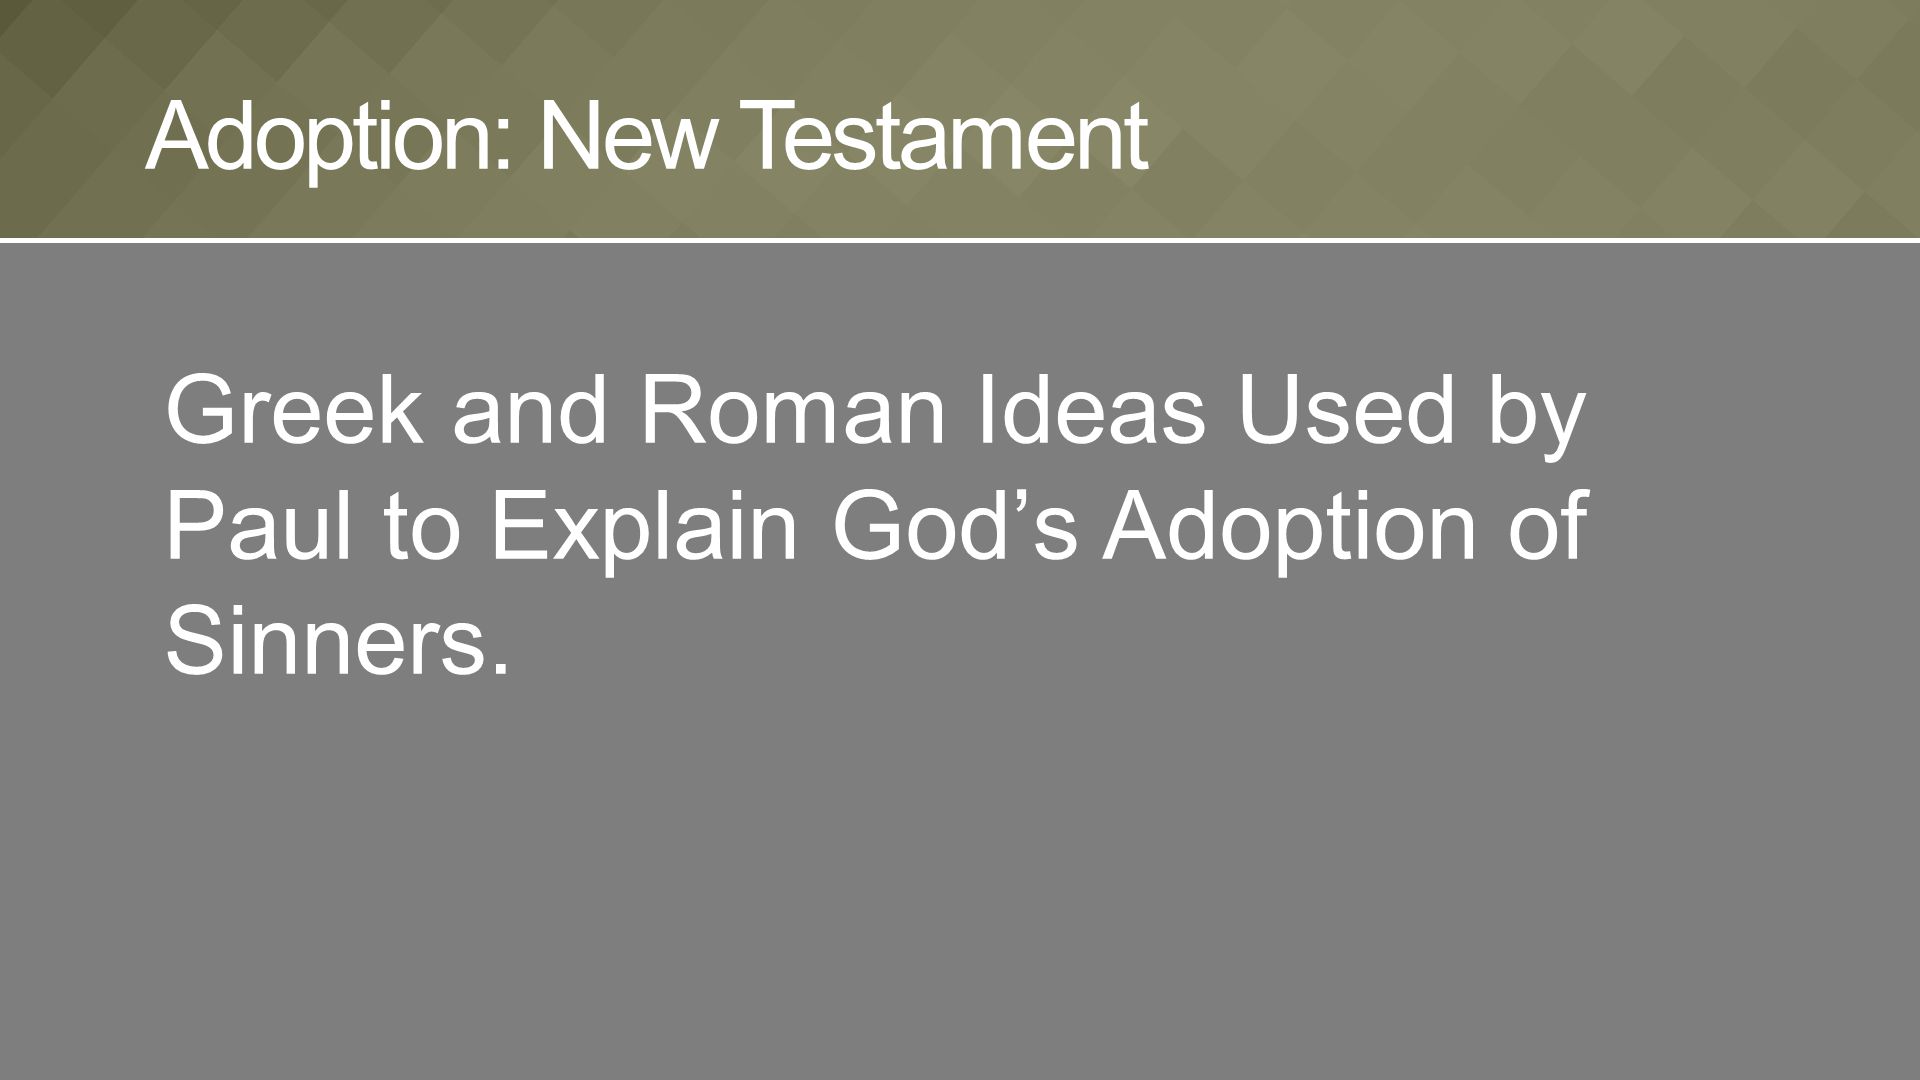 Greek and Roman Ideas Used by Paul to Explain God’s Adoption of Sinners. Adoption: New Testament